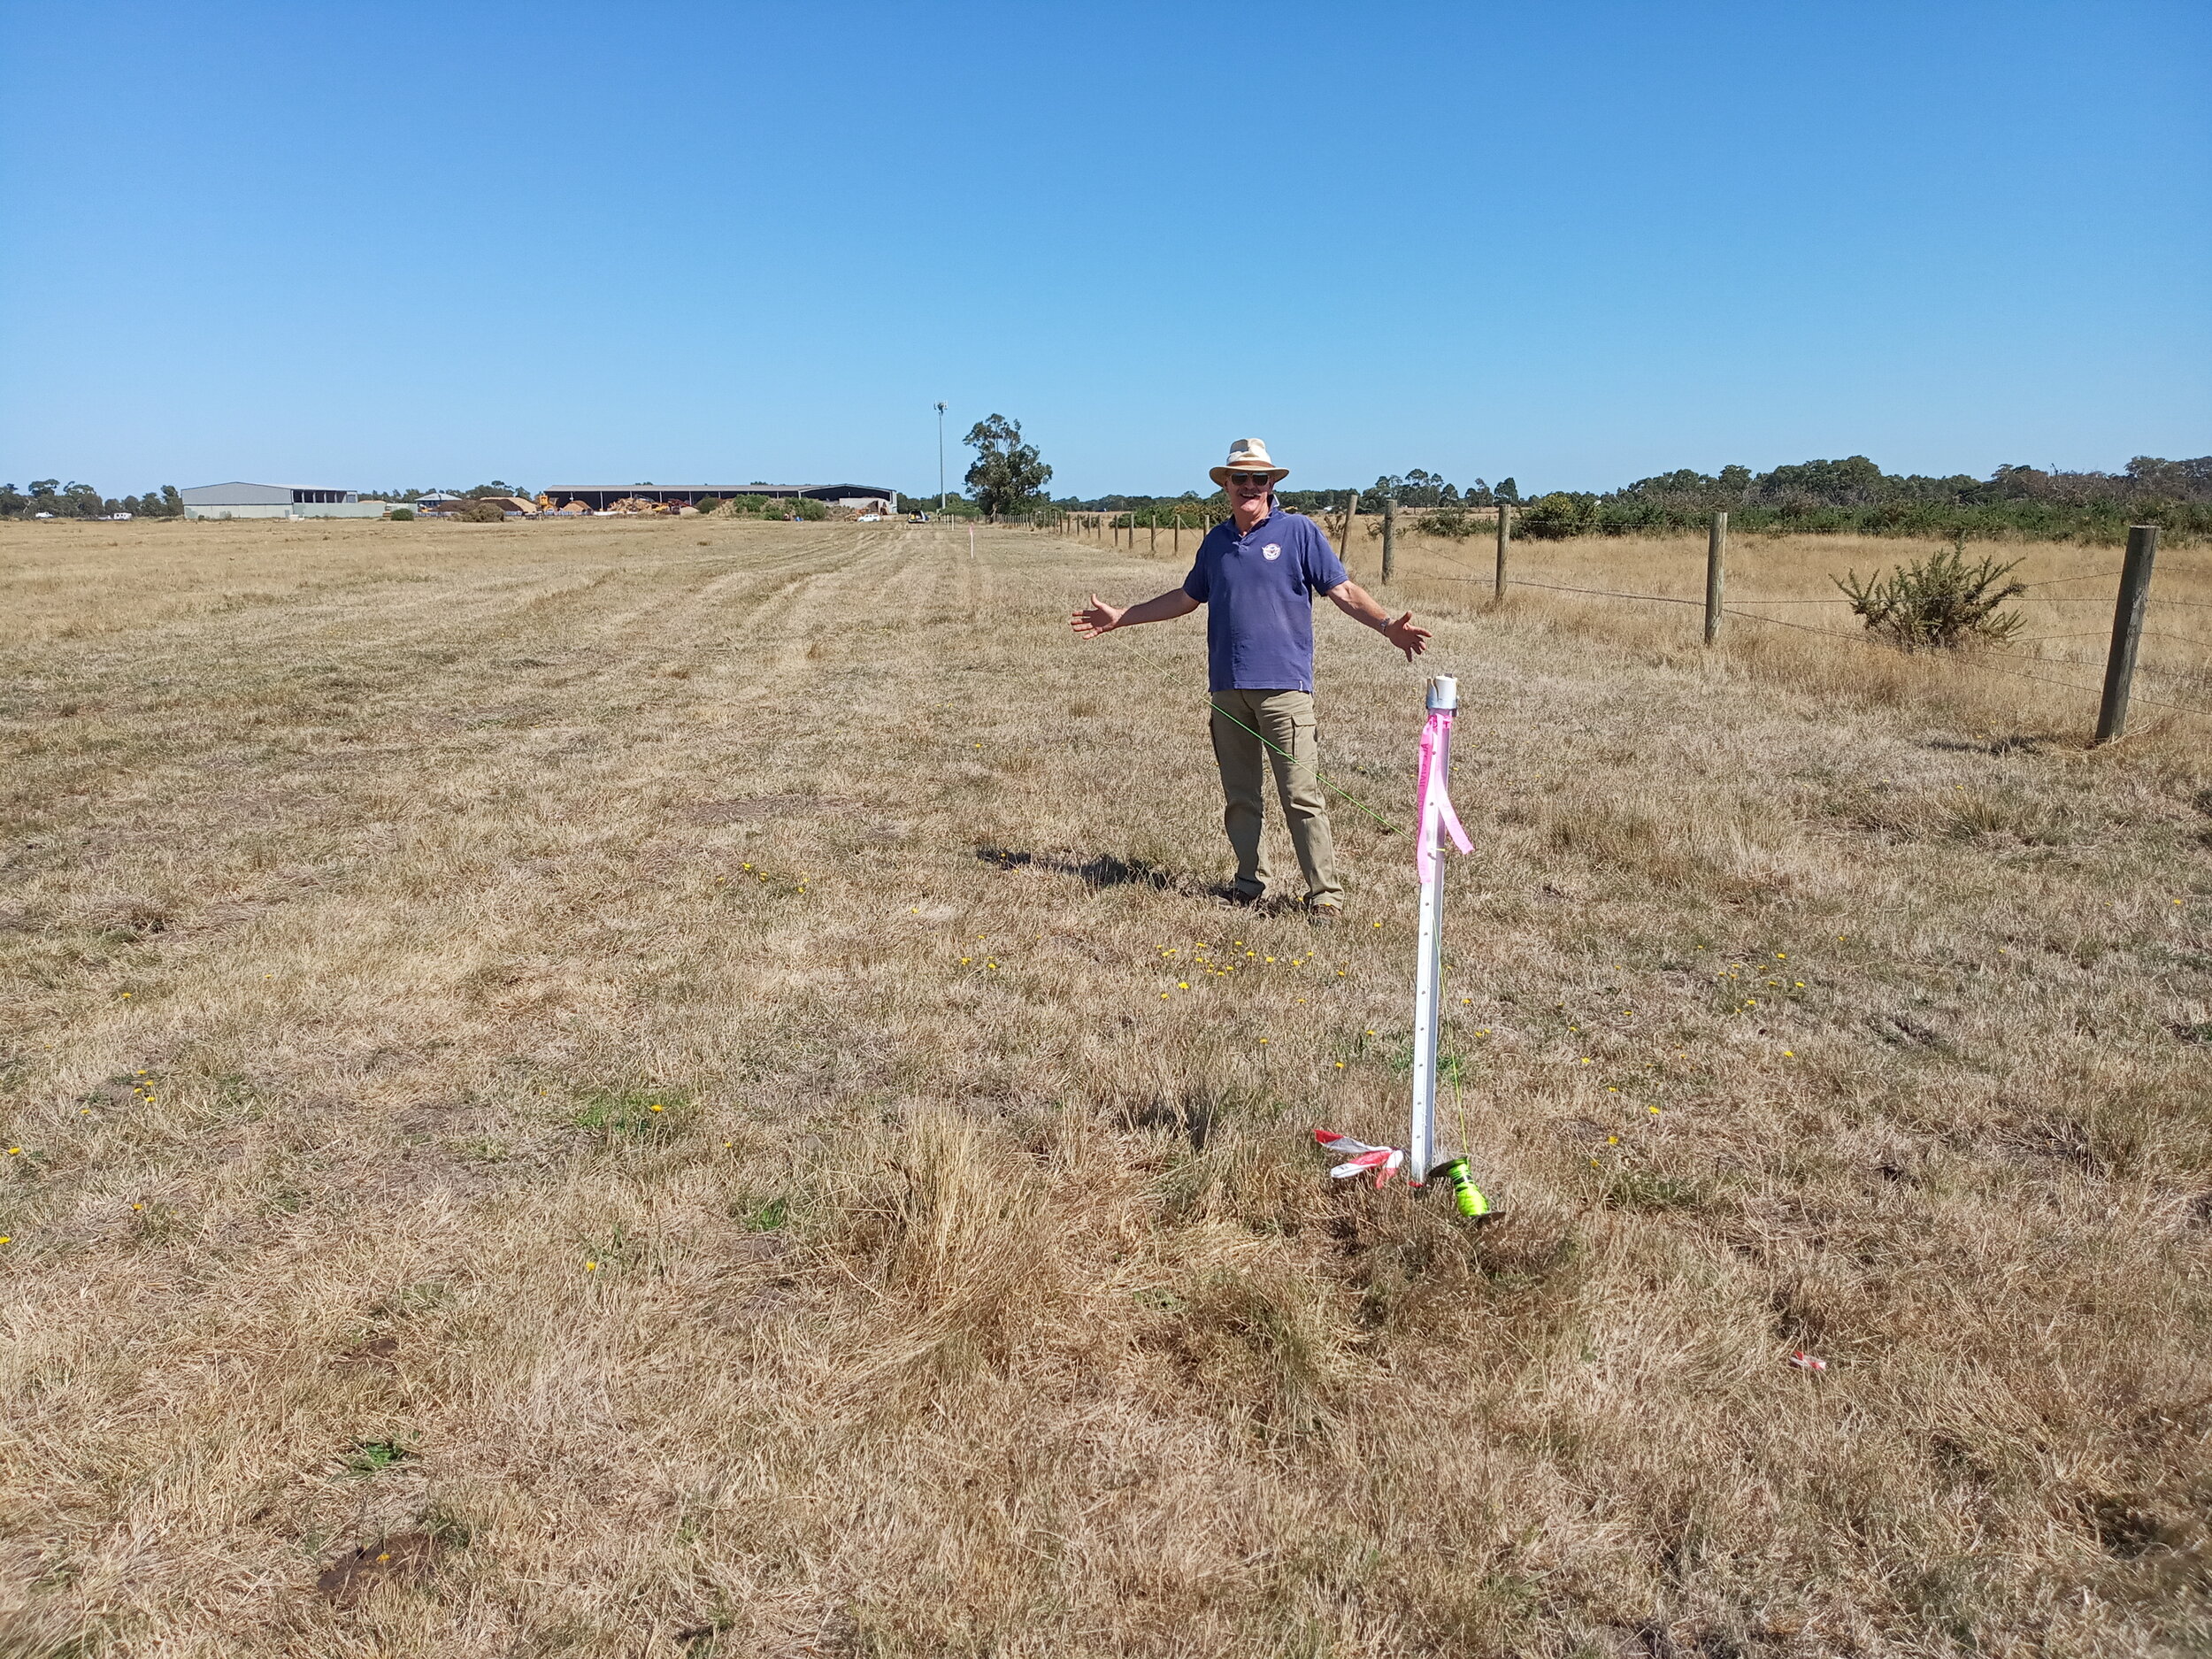  18/2  David W checks out Civilmech’s string line marking the north side of the new road 